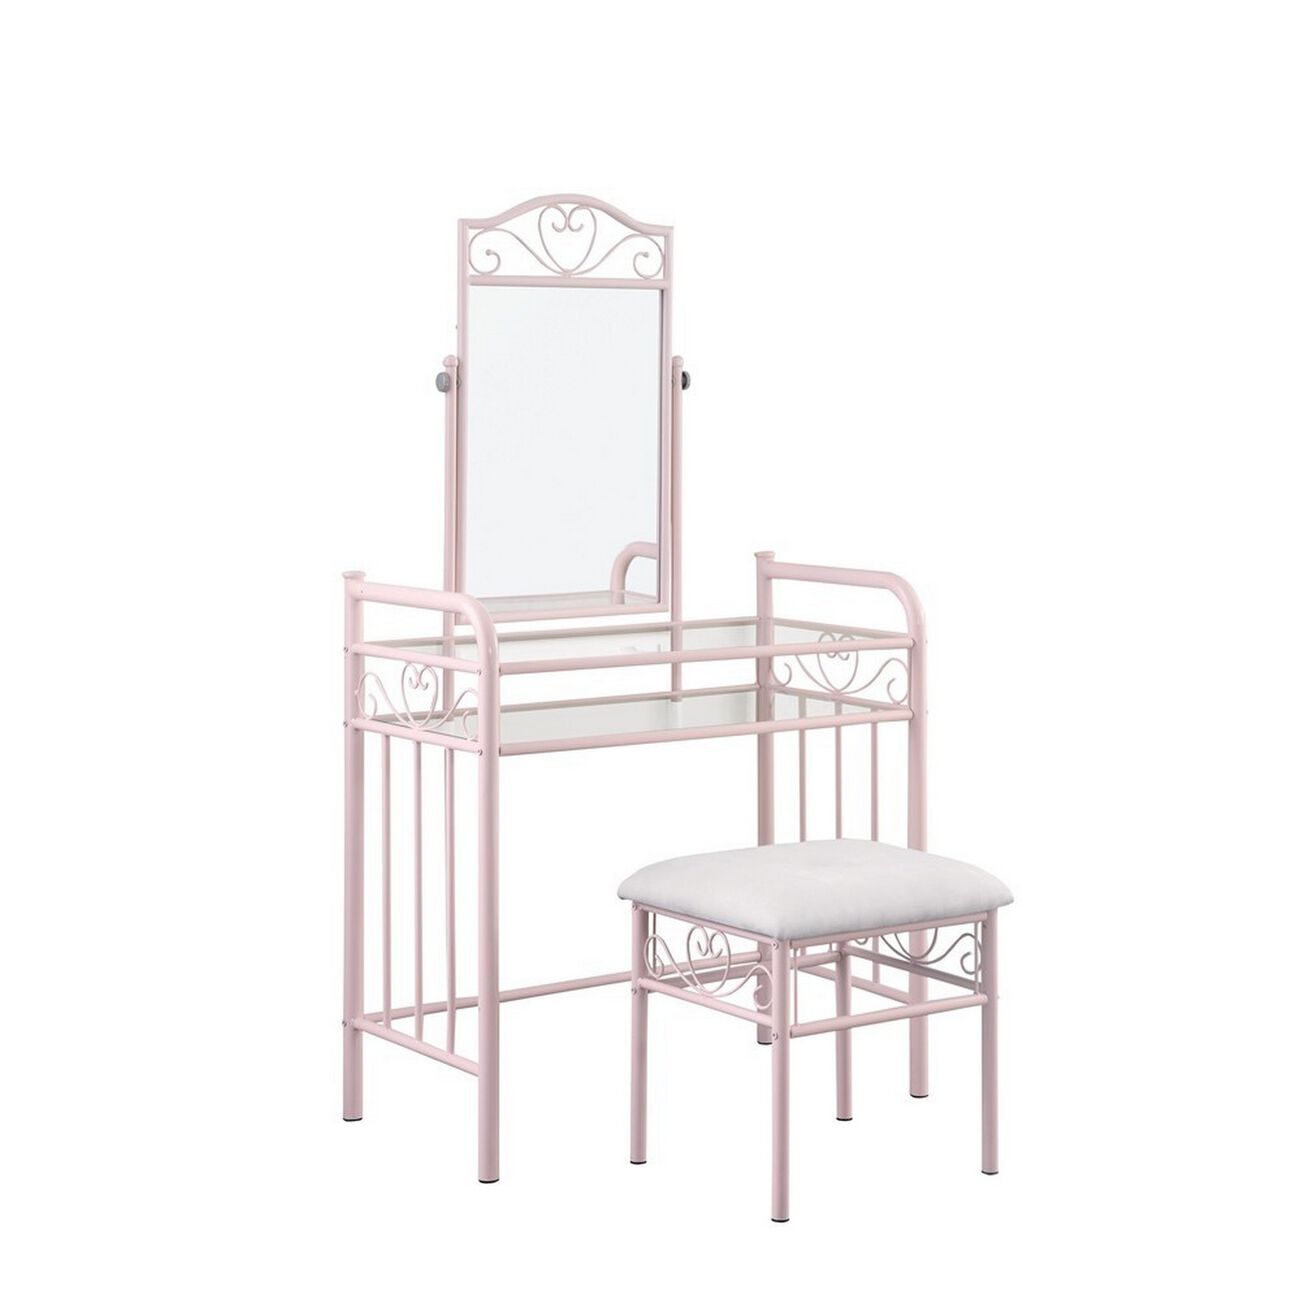 Traditional Style Metal 2 Piece Vanity Set with Glass Top, Pink and Gray